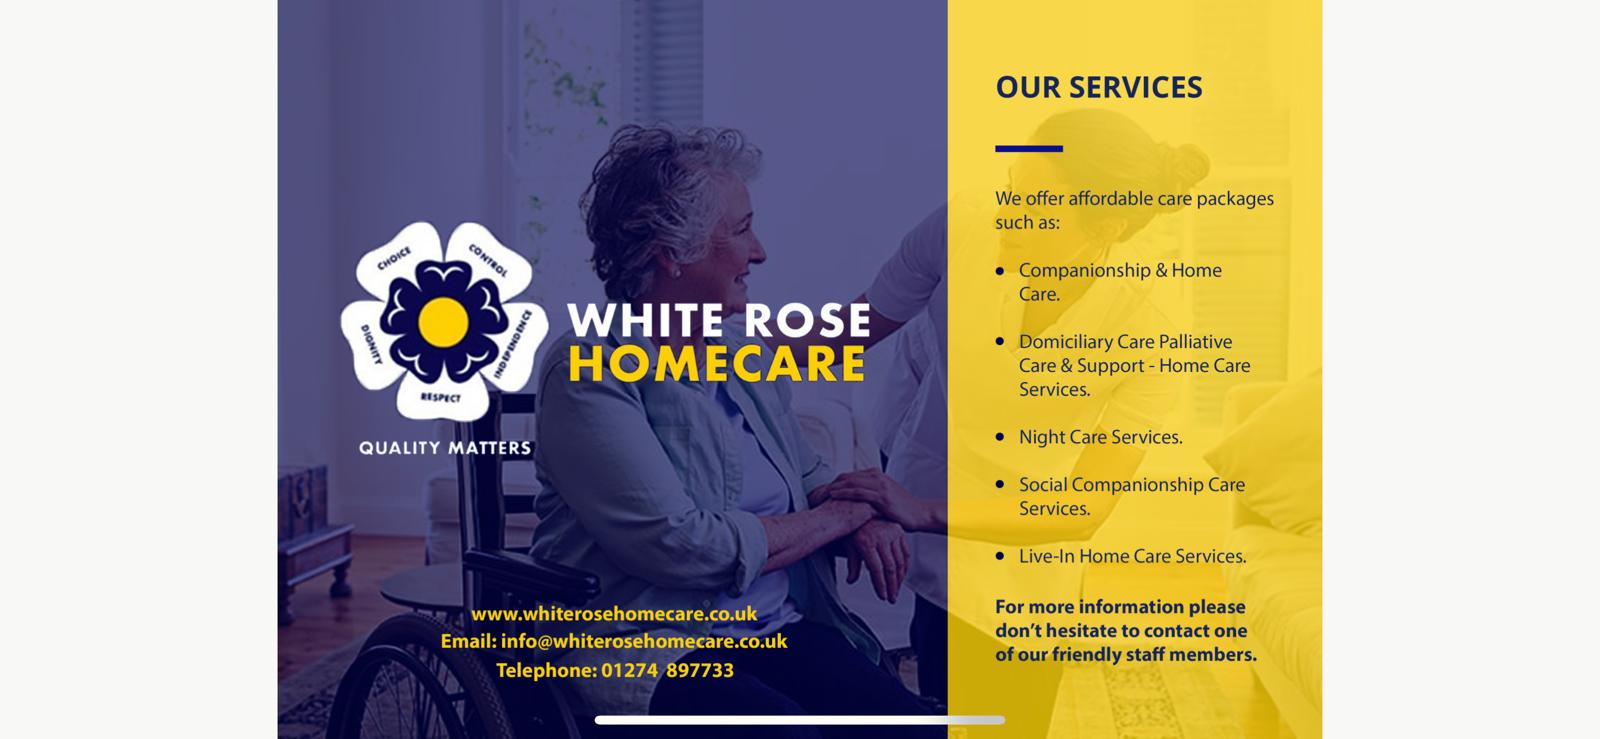 Whiterose home care limited